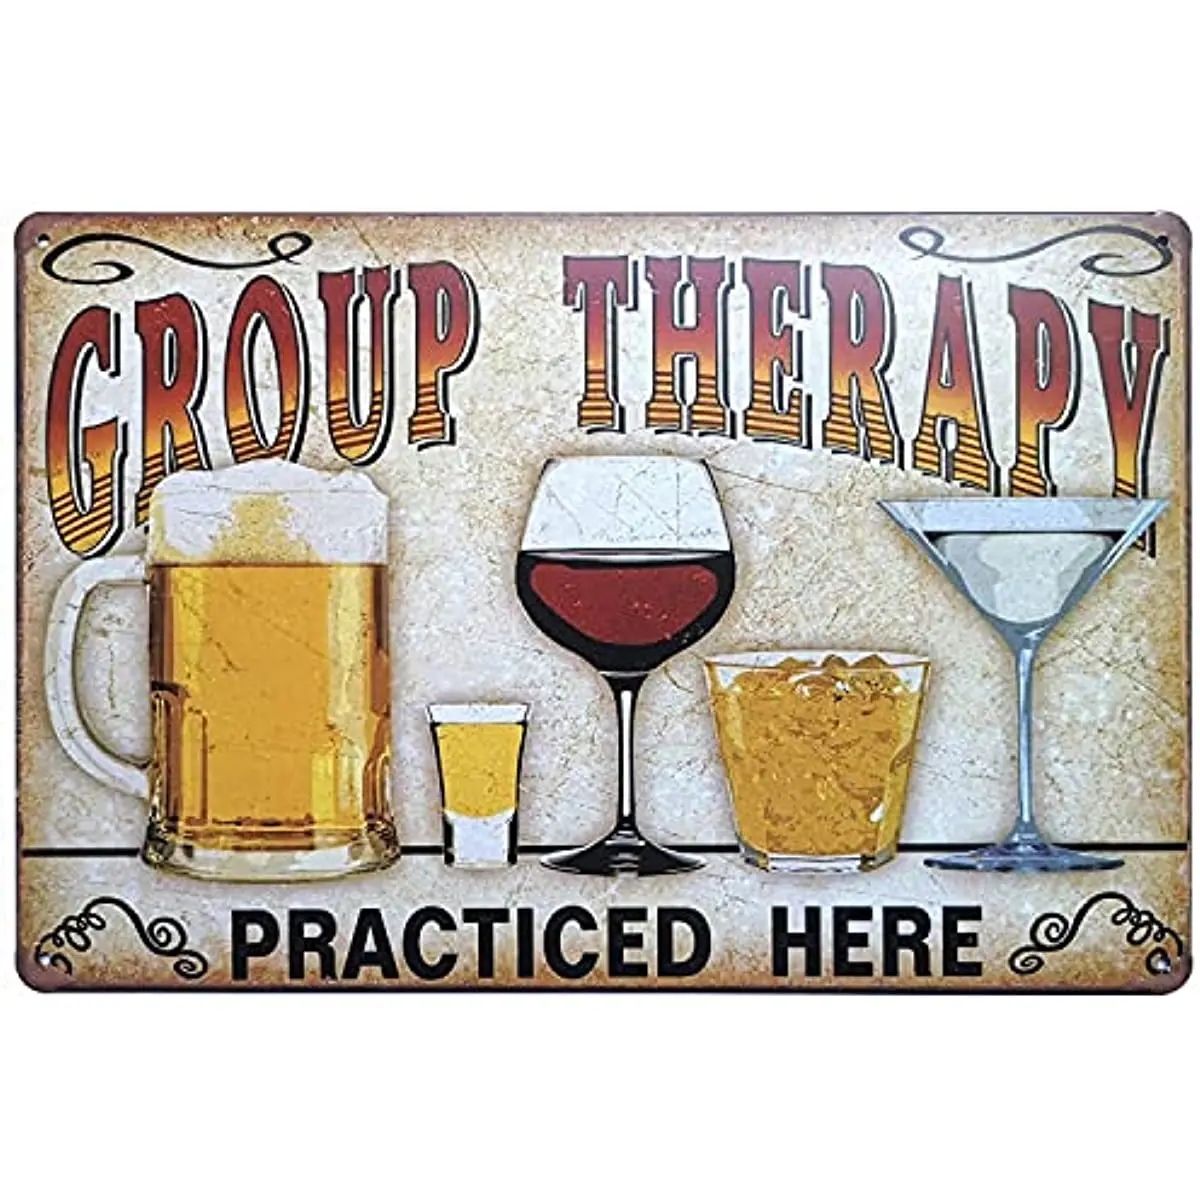 

Retro Vintage Metal Tin Sign Wall Plaque Poster Cafe Bar Pub Beer Club Wall Home Decor Group Therapy Practiced Here metal sign